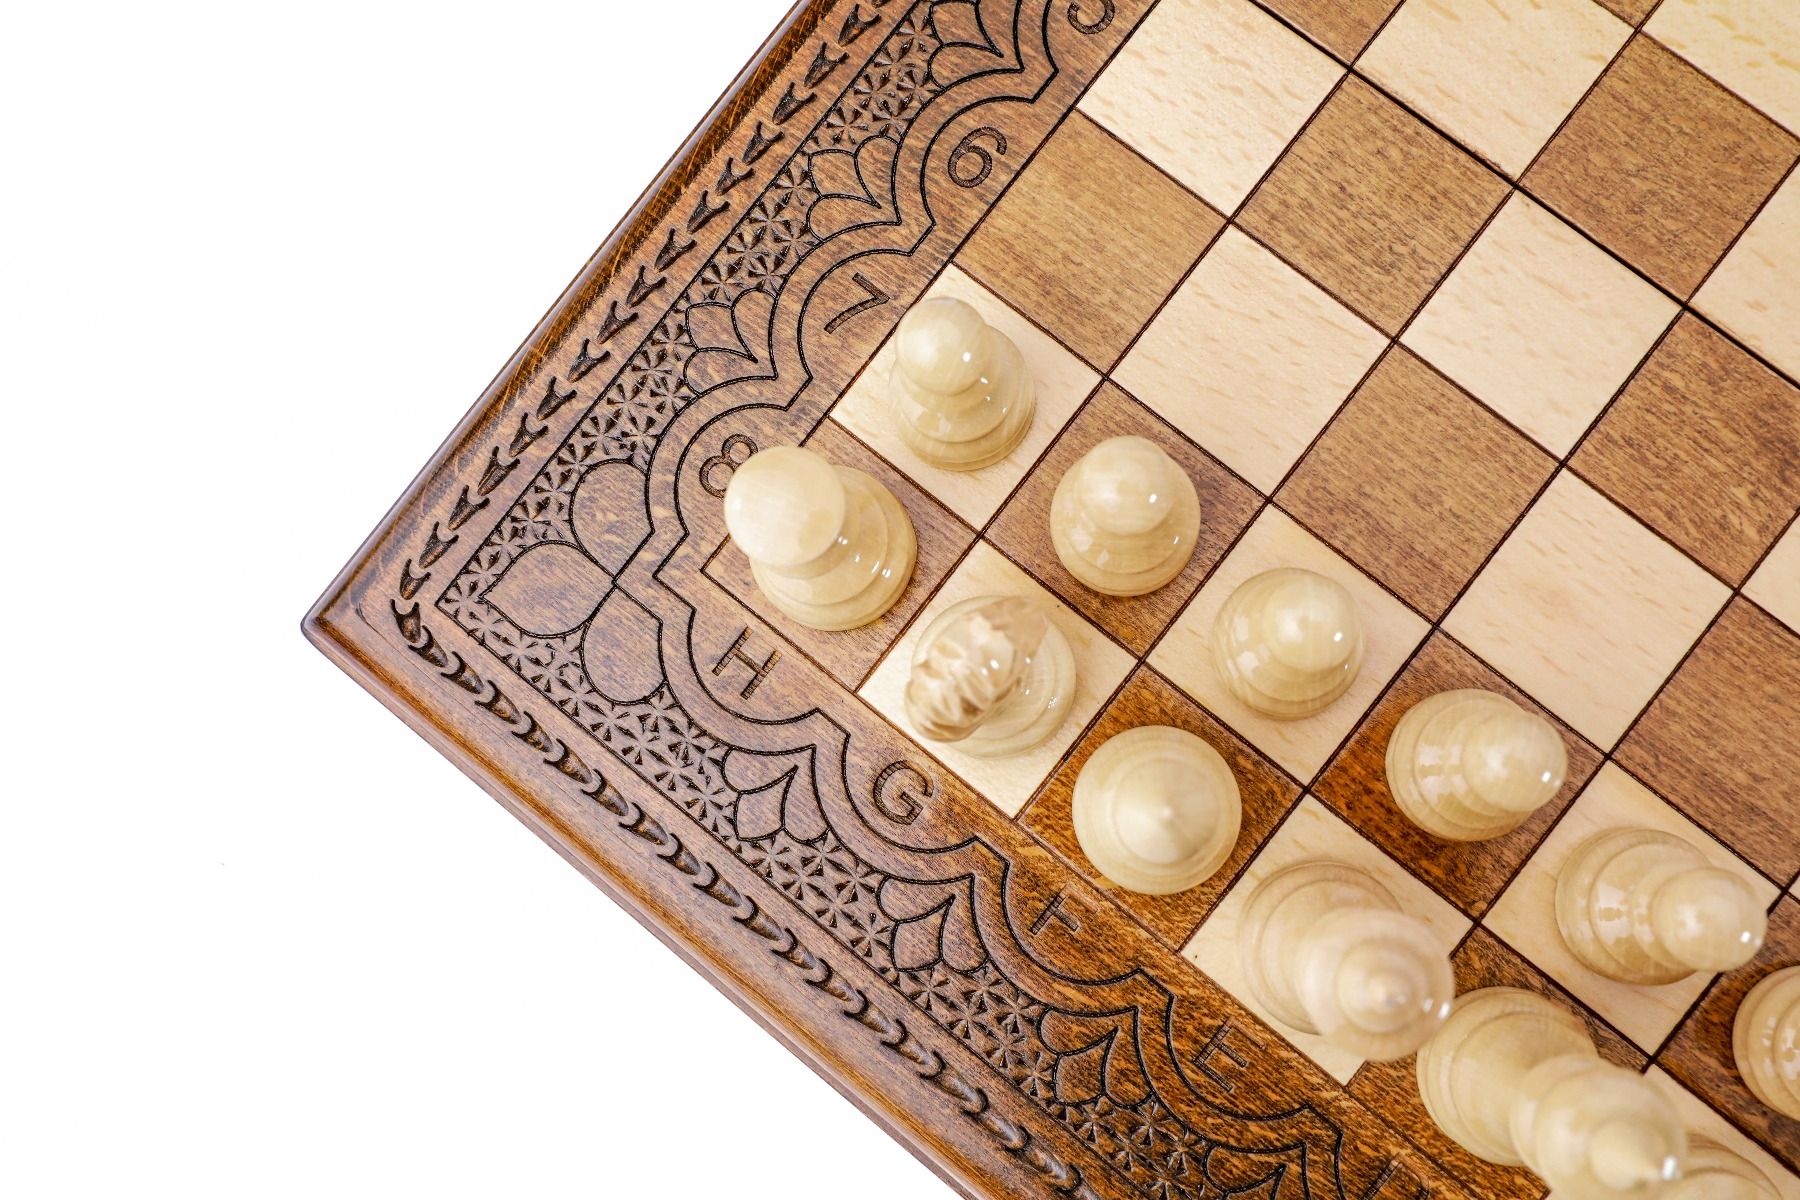 Command the board in style with a chess set that showcases the grandeur of classic chess through exquisite handcrafted detailing on wood.